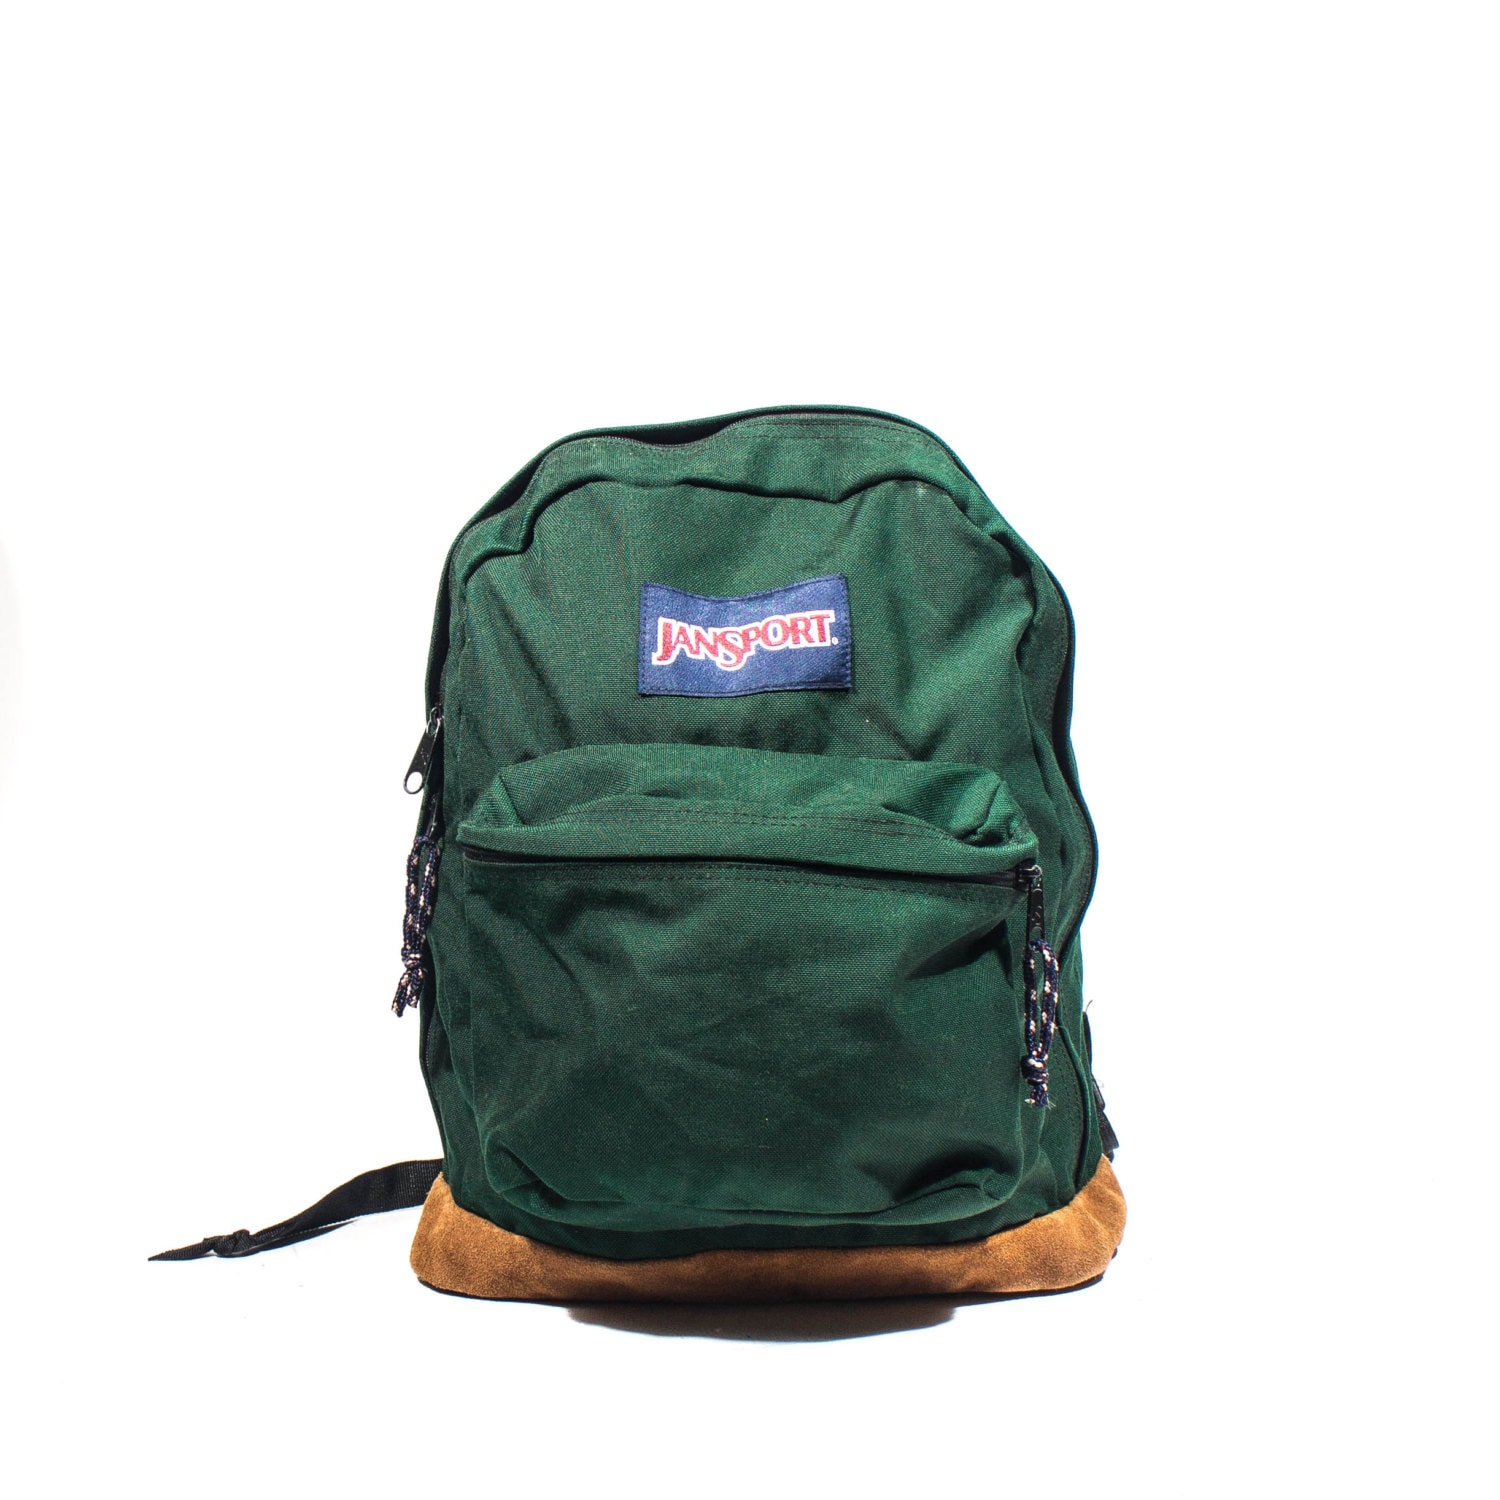 Vintage Jansport Backpack In Green Nylon and Tan Leather